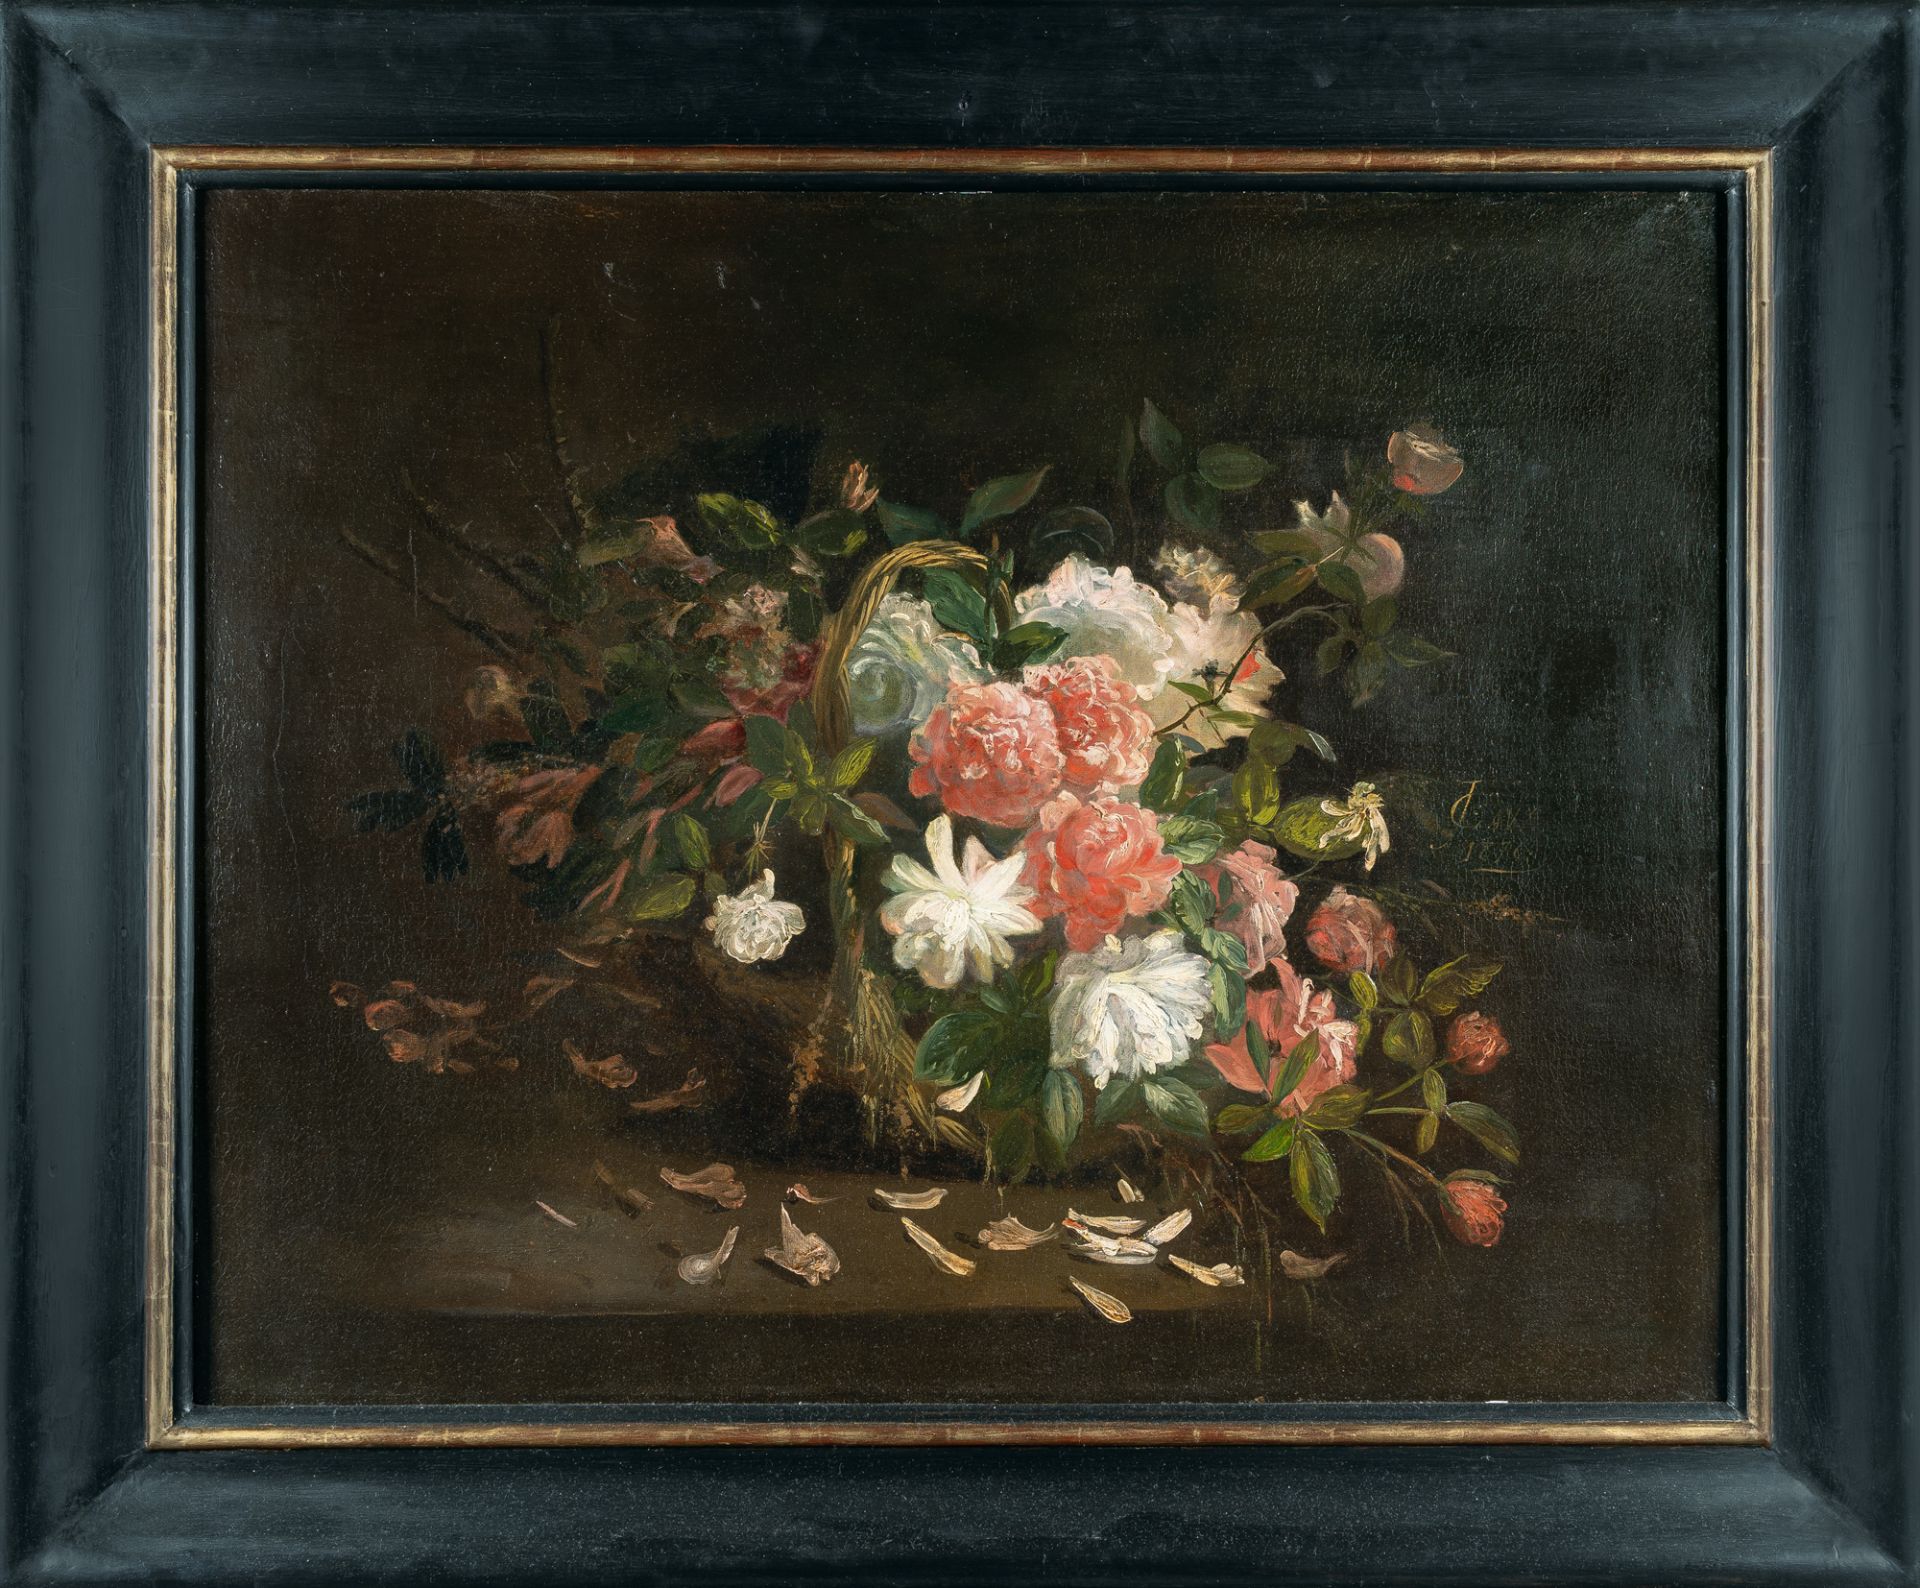 Iphigénie decaux – Flower still life with red and white roses in a basket - Image 4 of 4